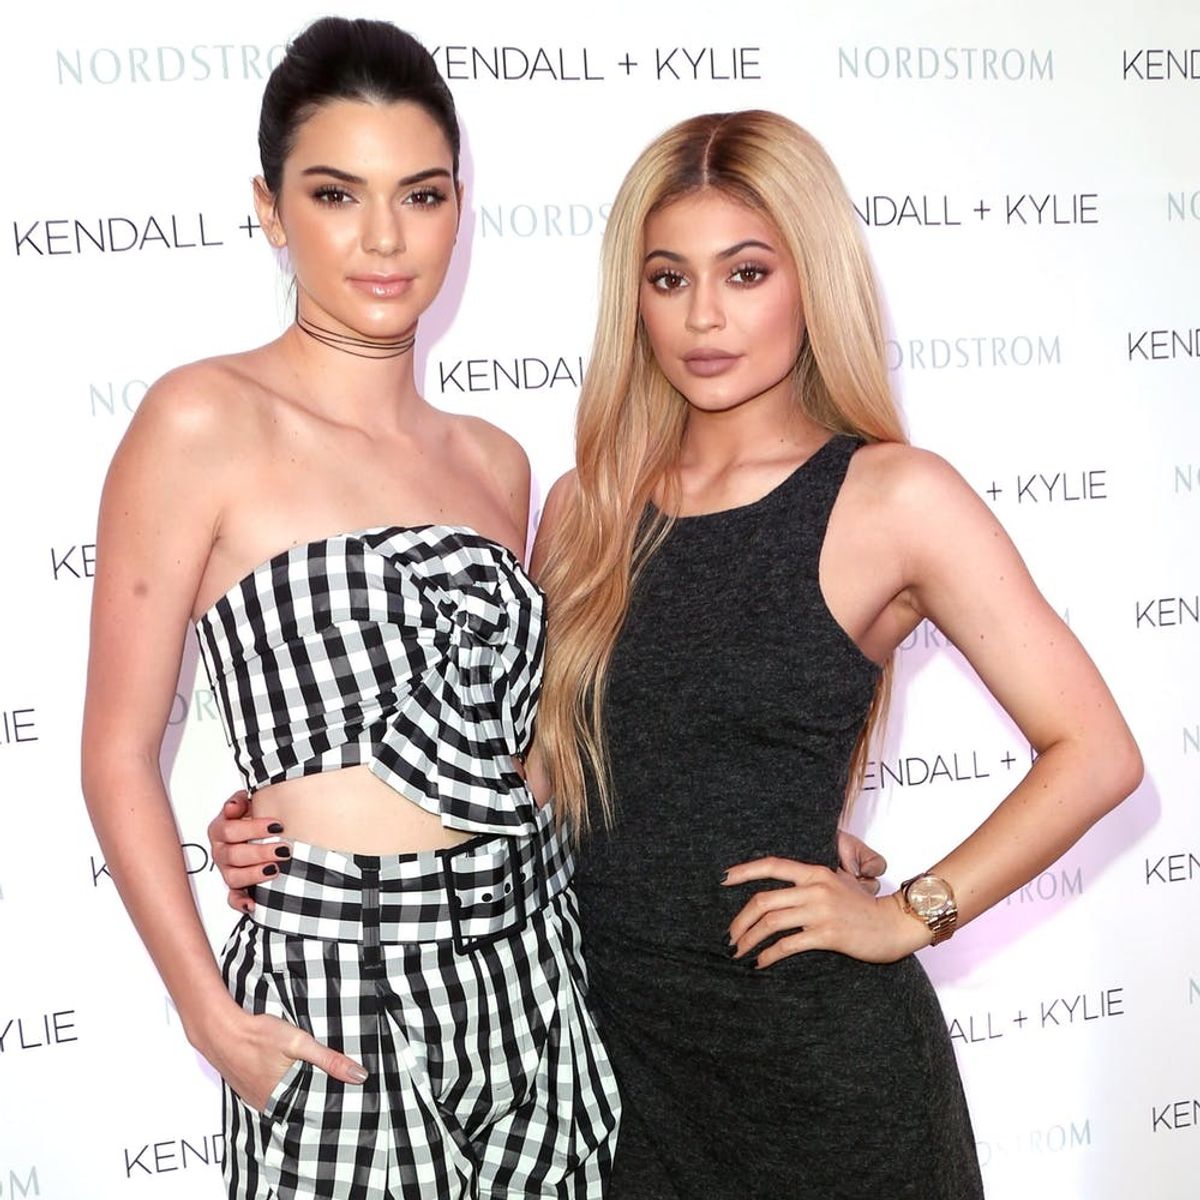 Why Kendall + Kylie Jenner Are the Olsen Twins of Affordable Fashion